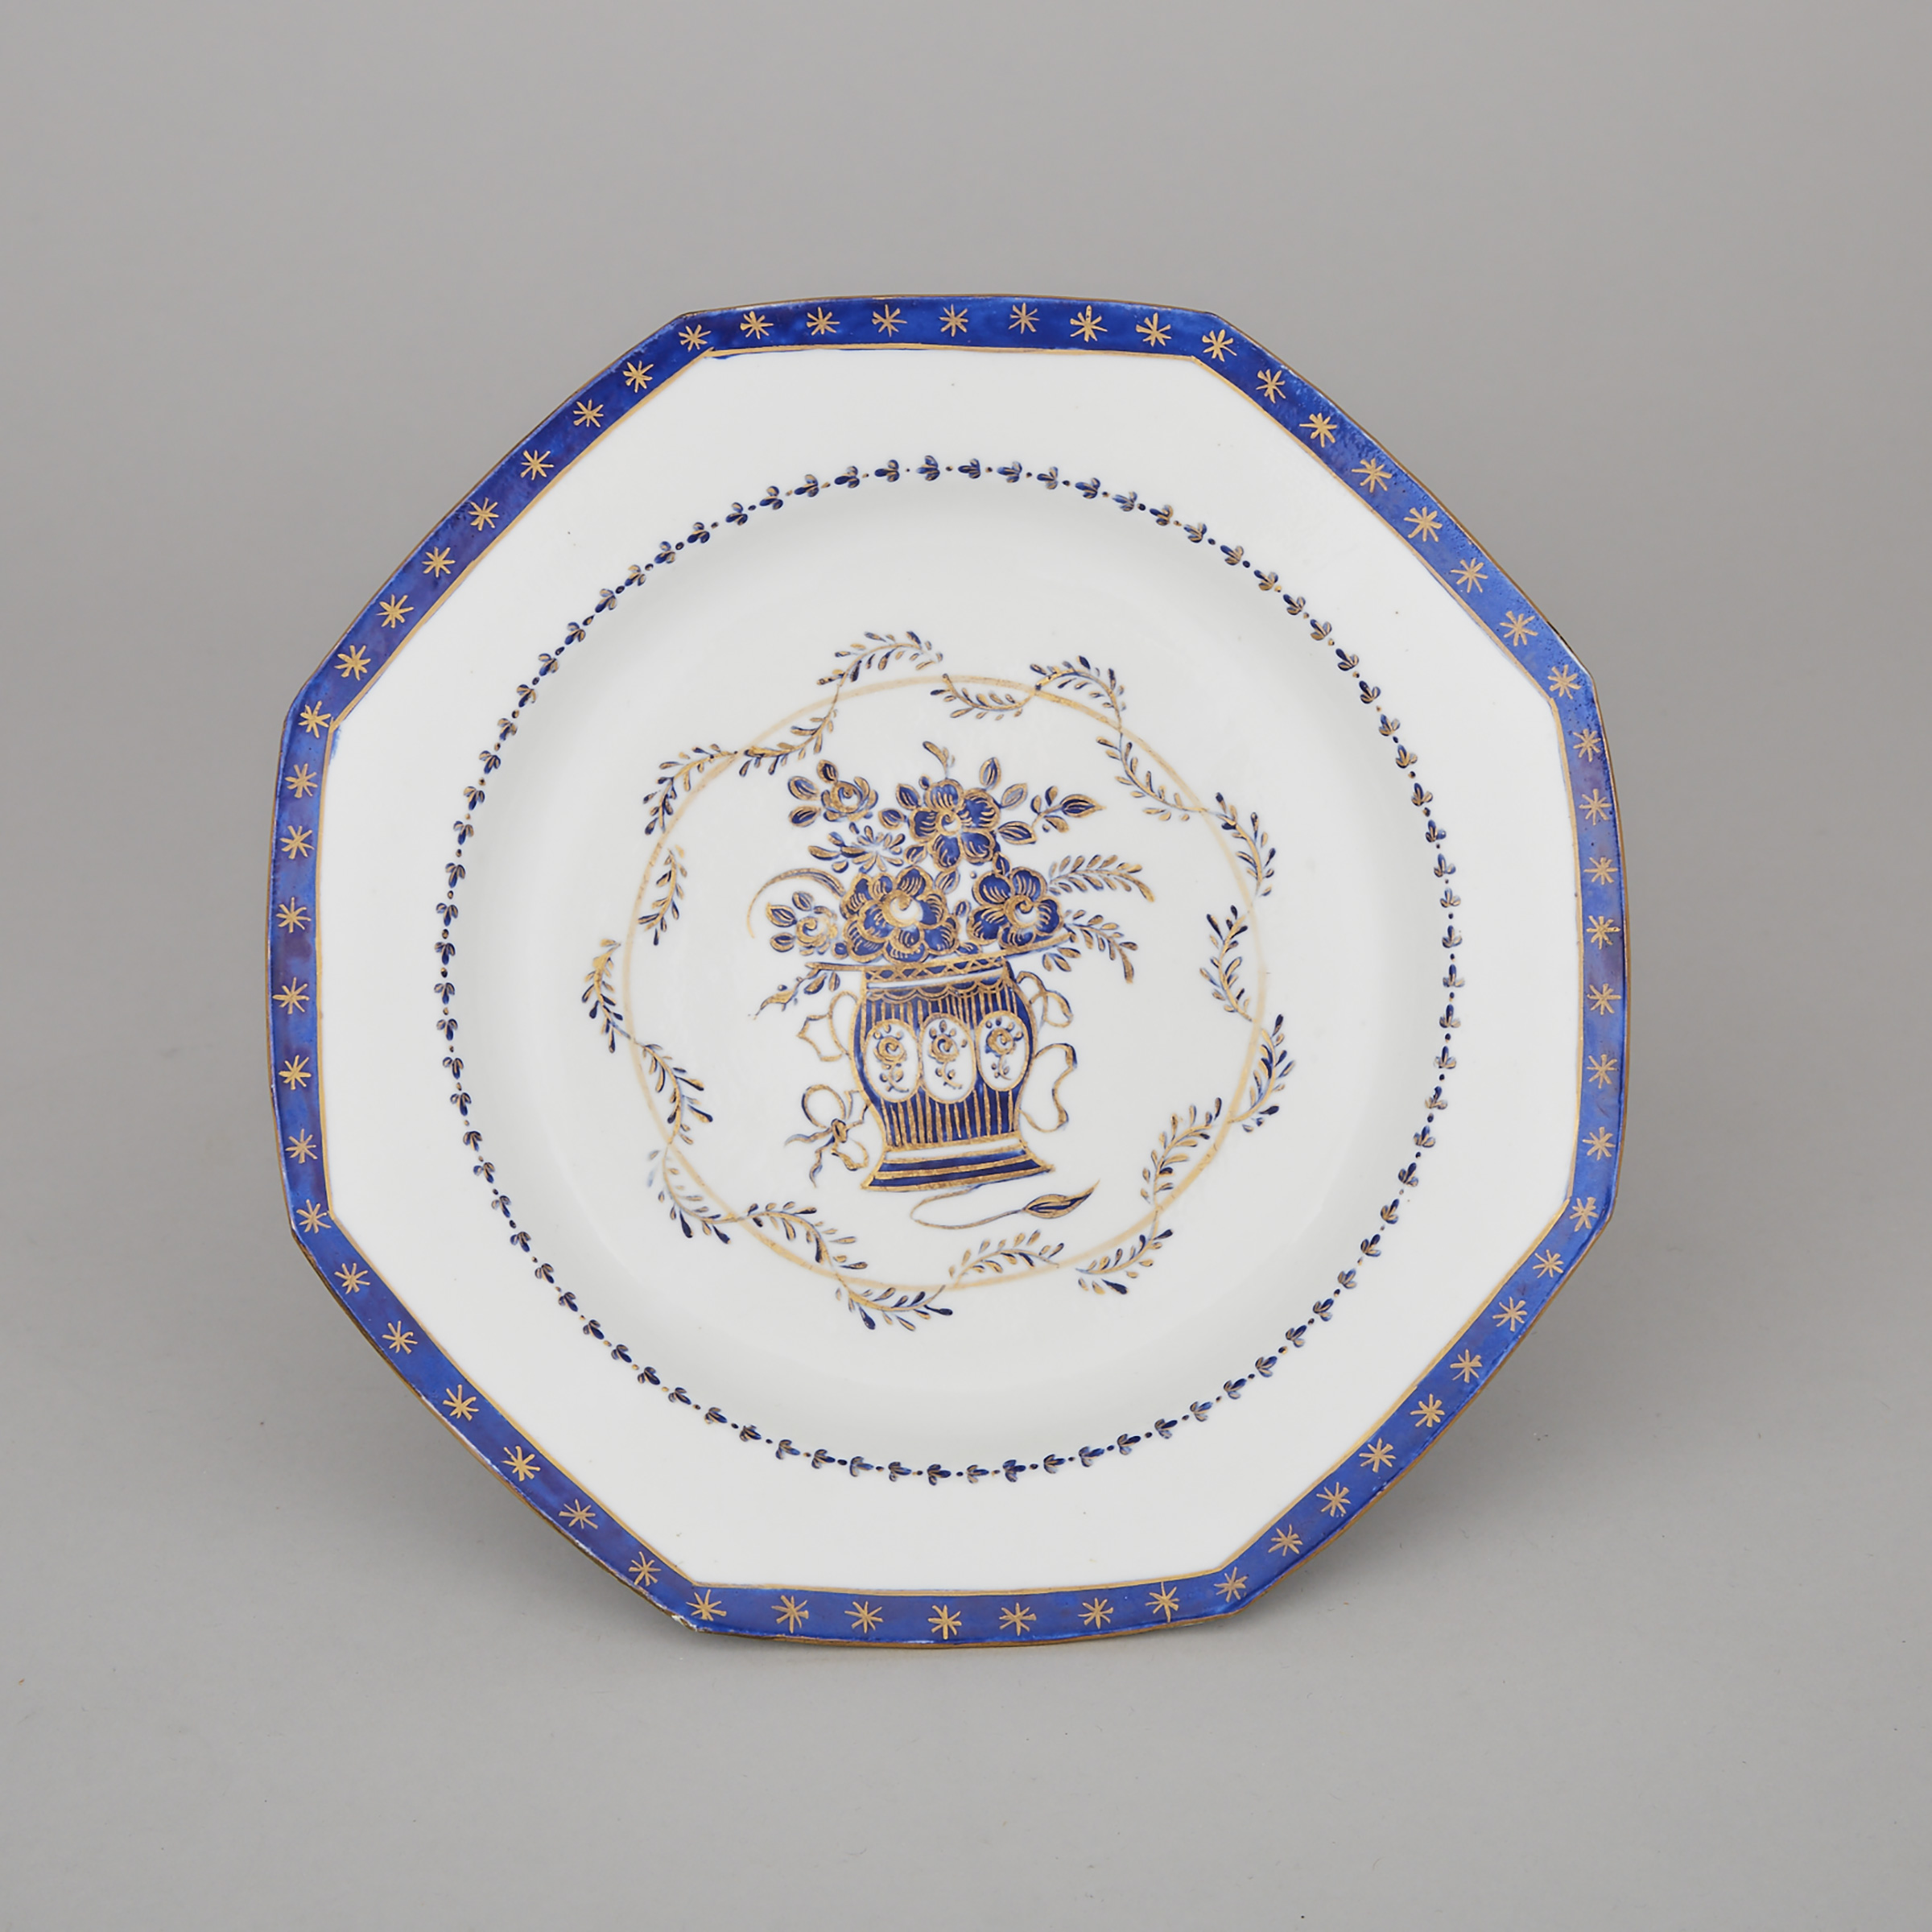 Bow Cobalt Blue and Gilt Decorated Octagonal Plate, c.1760